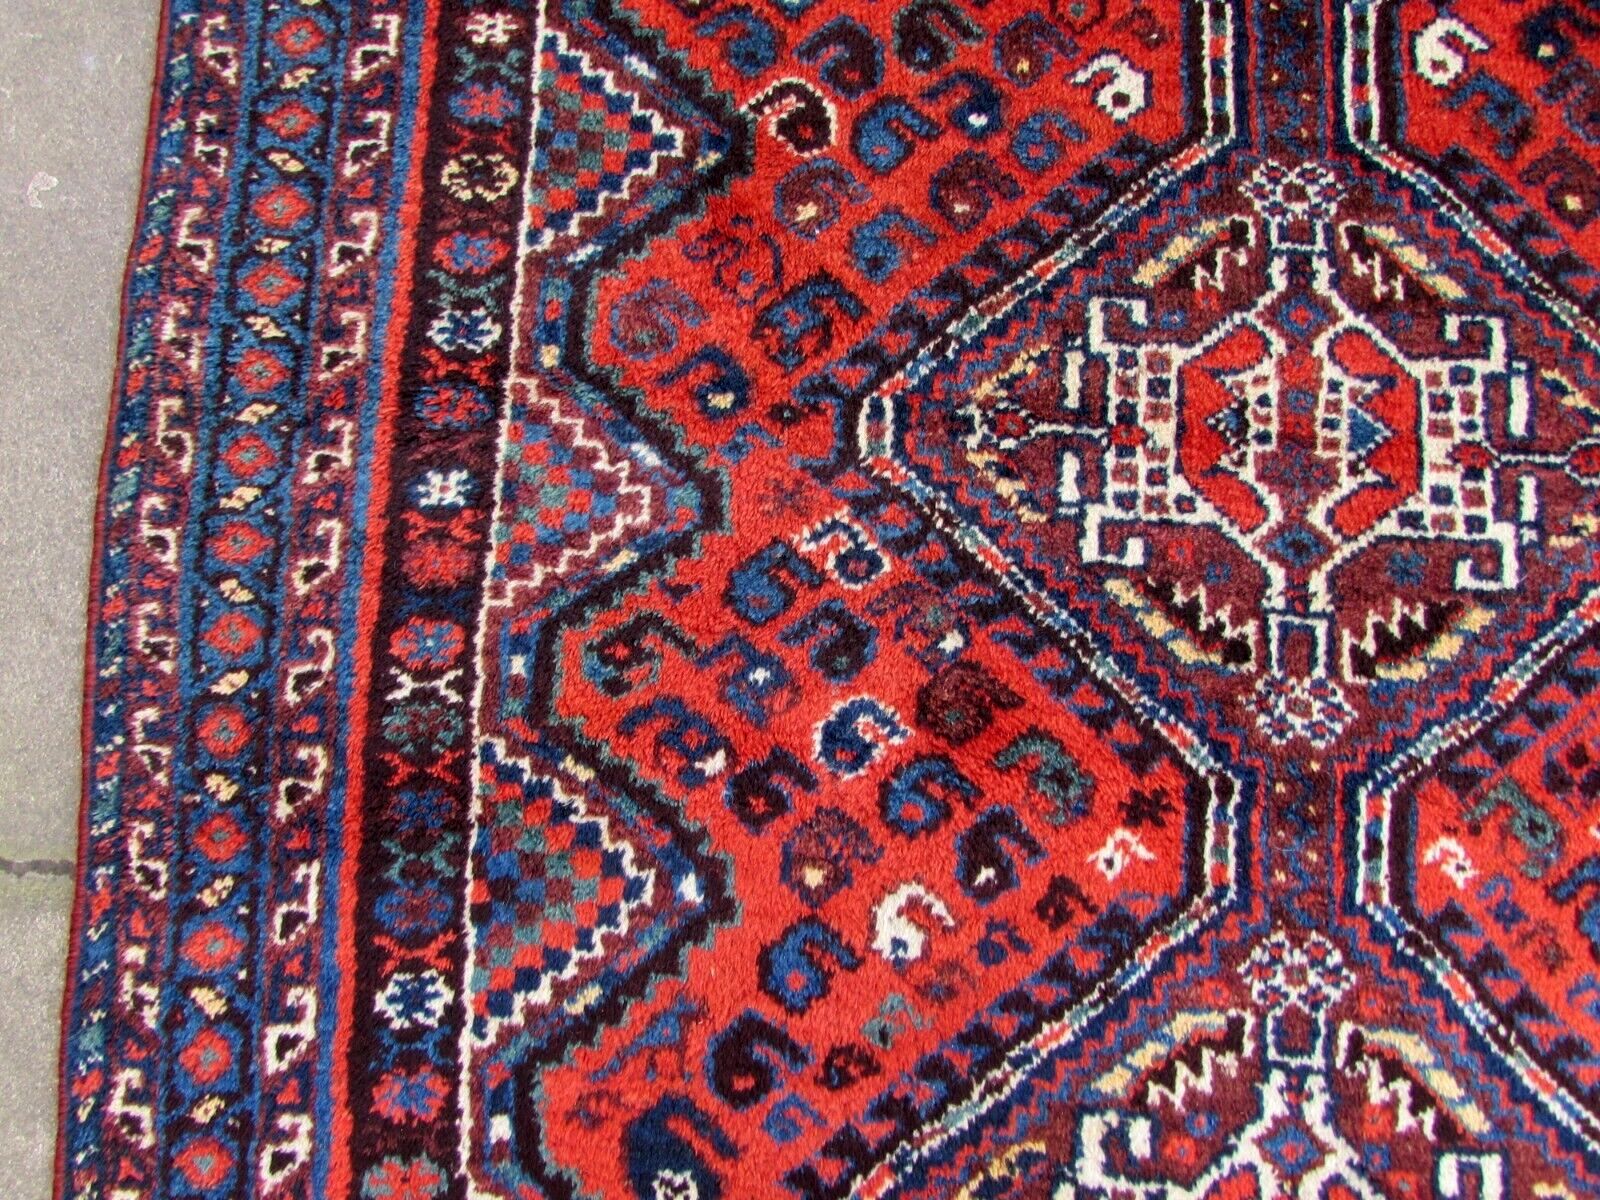 Handmade antique Persian Shiraz rug in traditional medallion design. The rug is from the beginning of 20th century in original good condition.